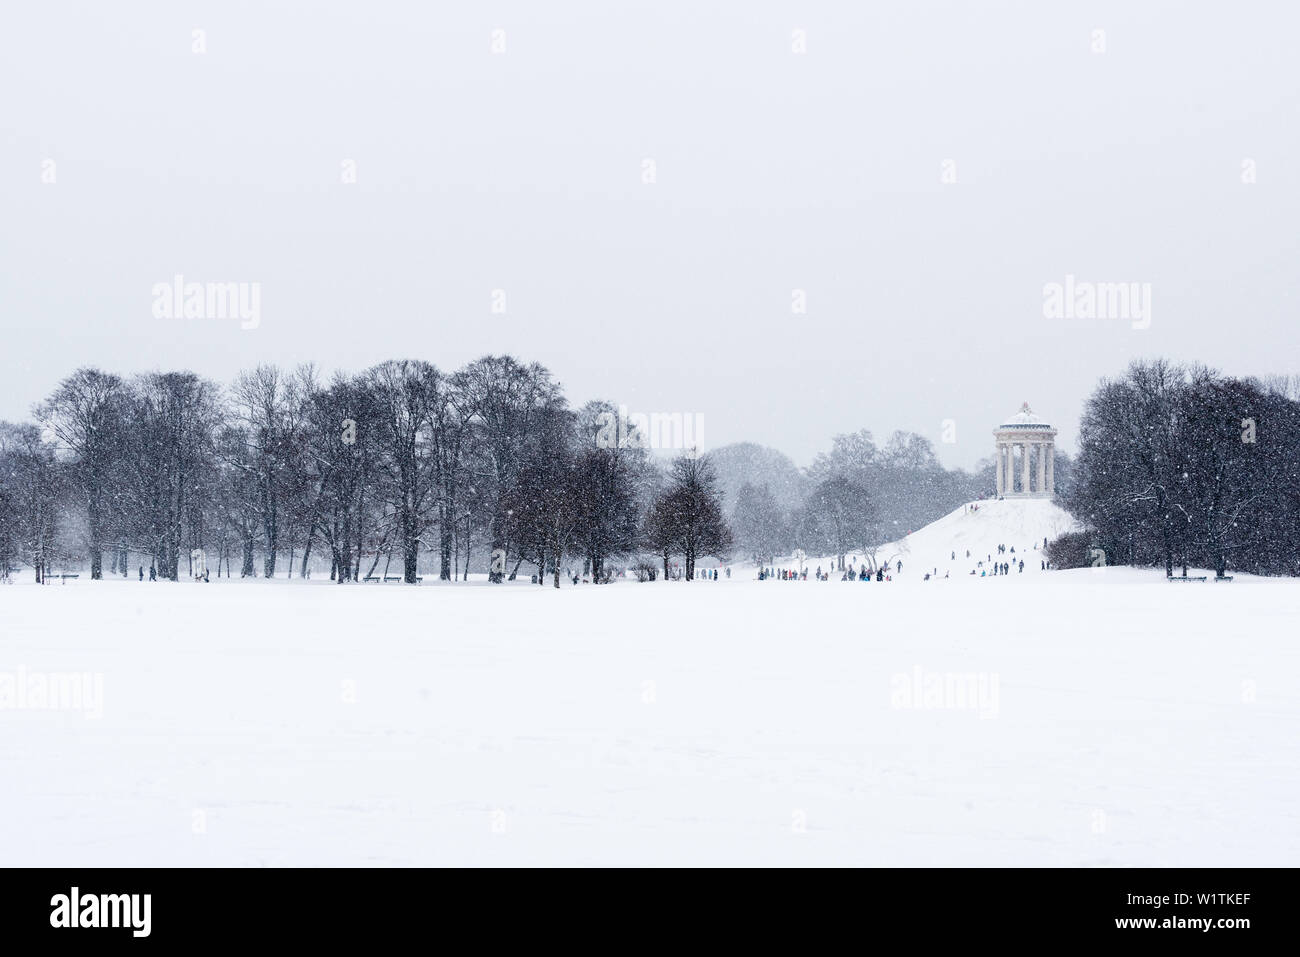 Sledging during Snow Fall at Monopteros, English Garden, Munich, Germany Stock Photo